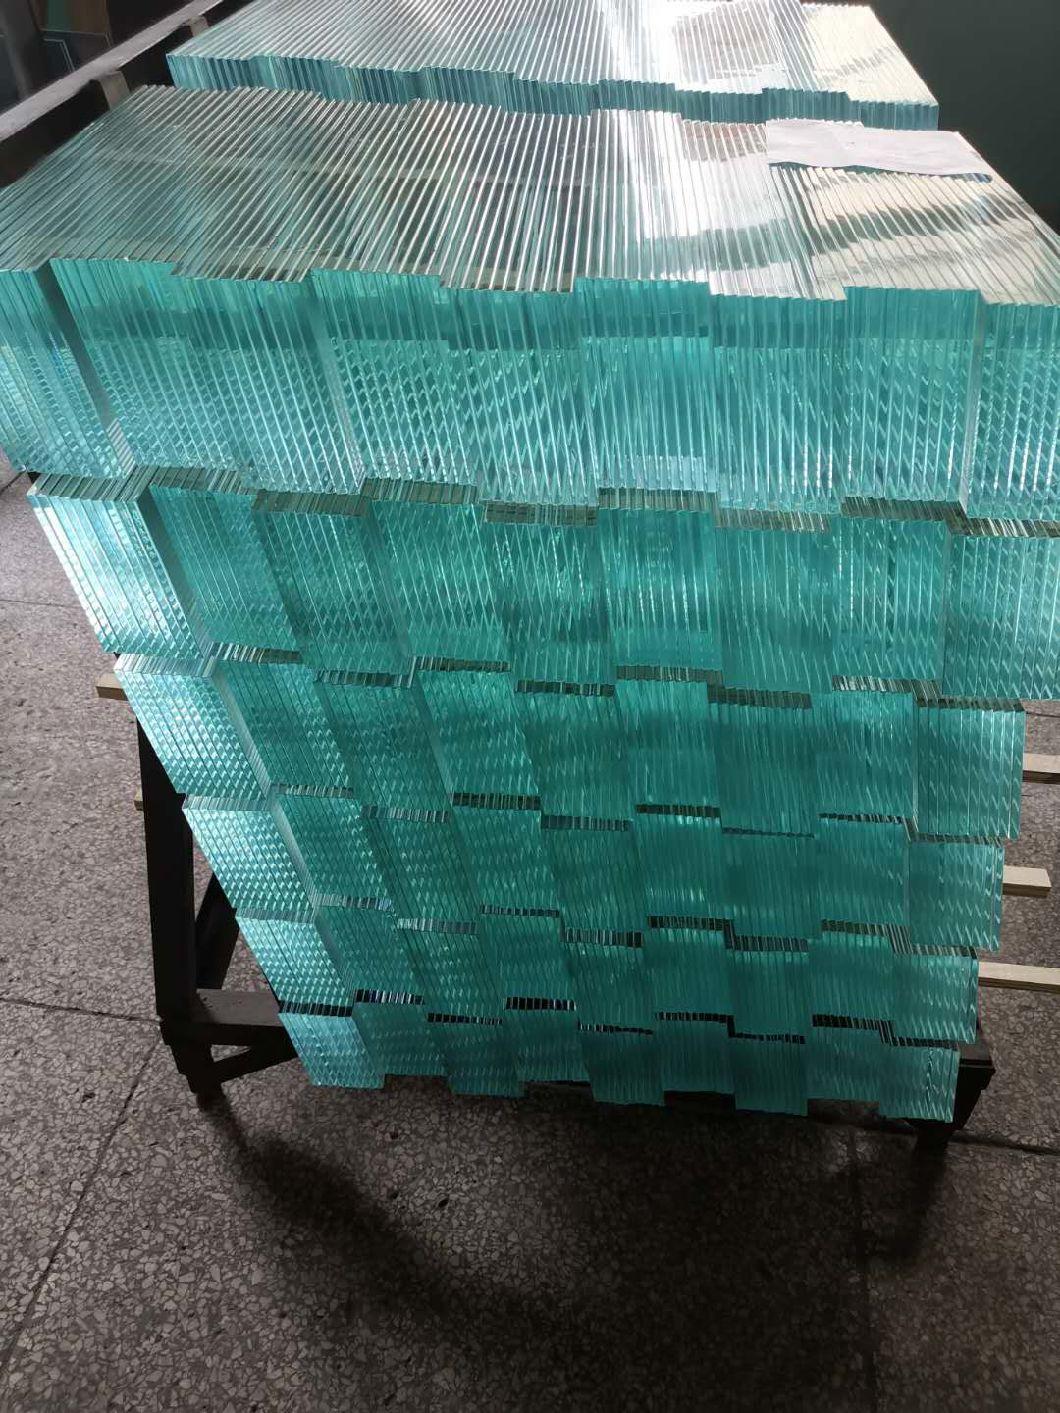 3.2mm 4mm Ultra-White Low Iron Tempered Glass for Solar